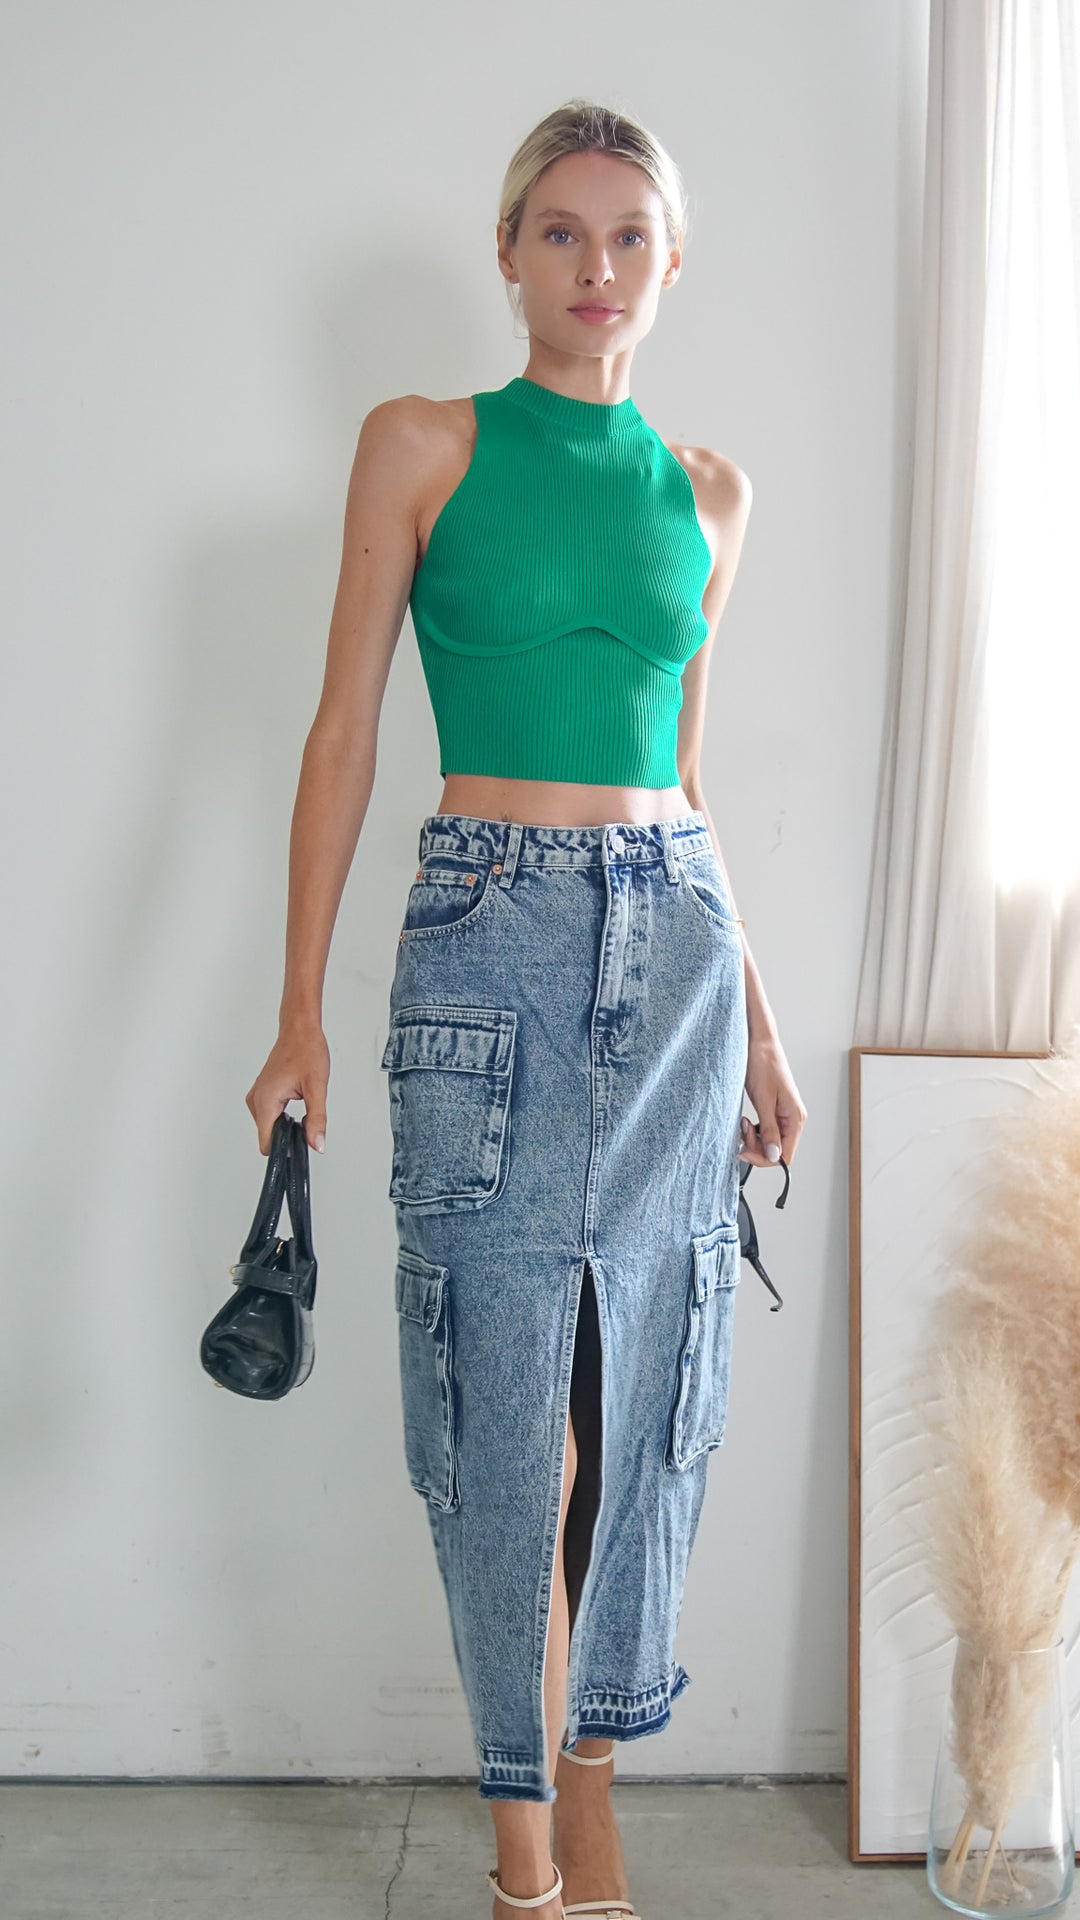 Maybelle Cropped Halter Top - Steps New York